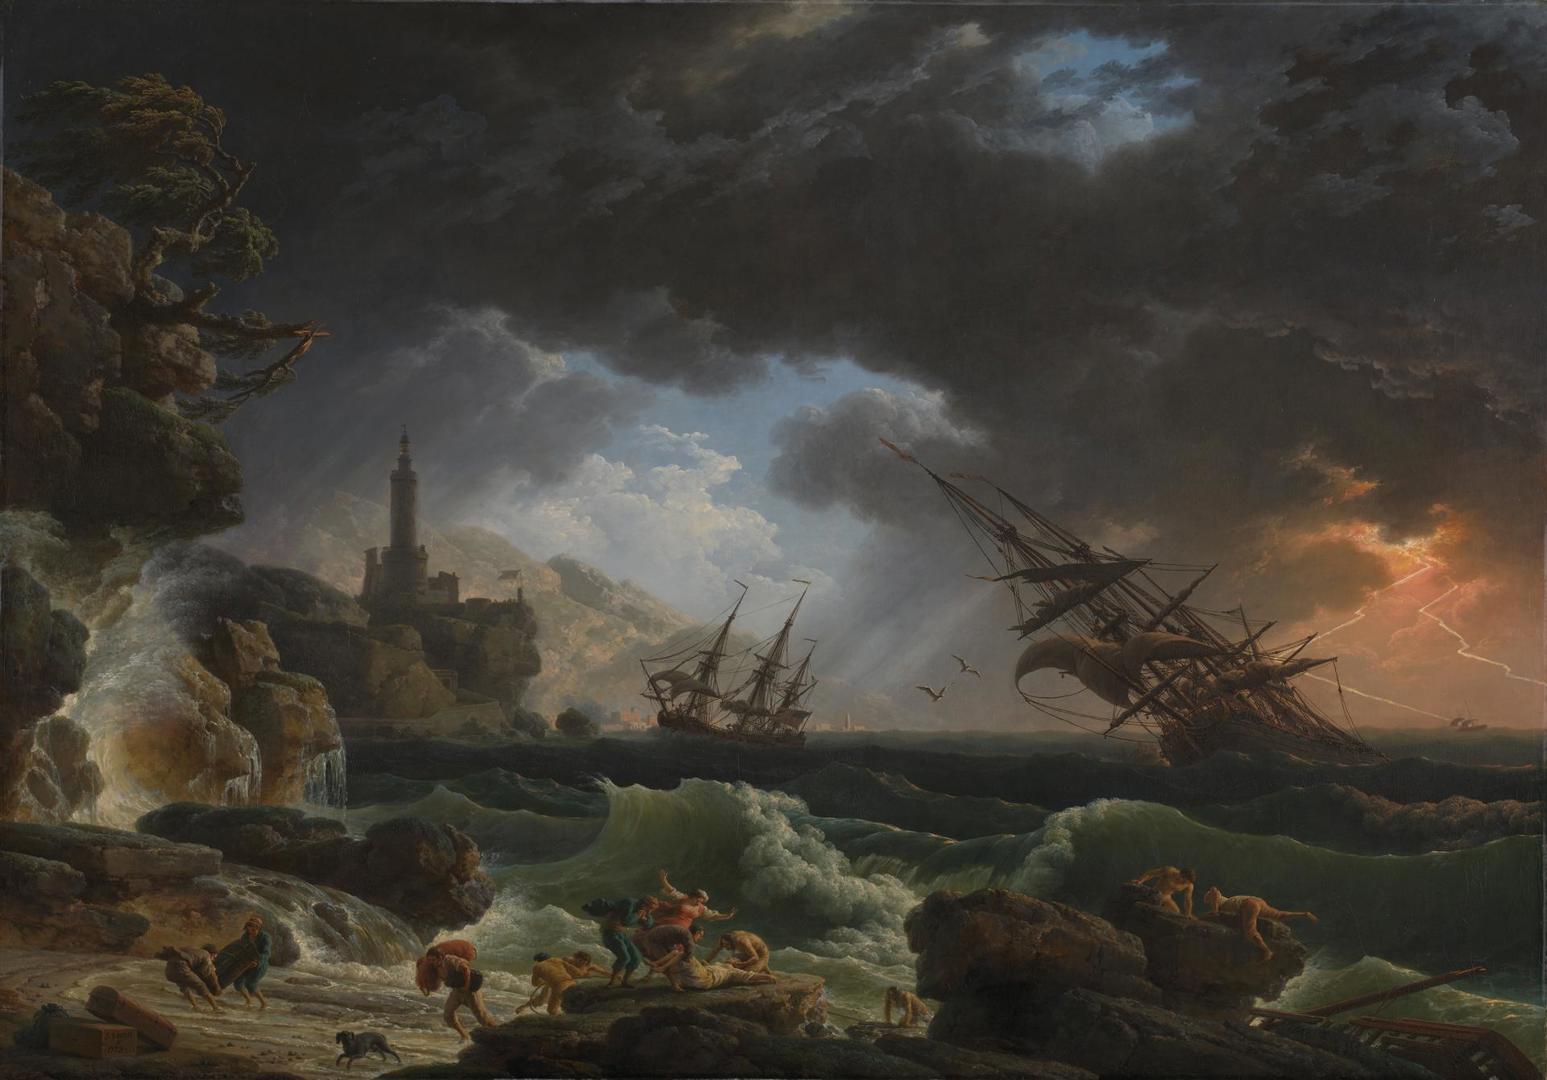 A Shipwreck in Stormy Seas by Claude-Joseph Vernet